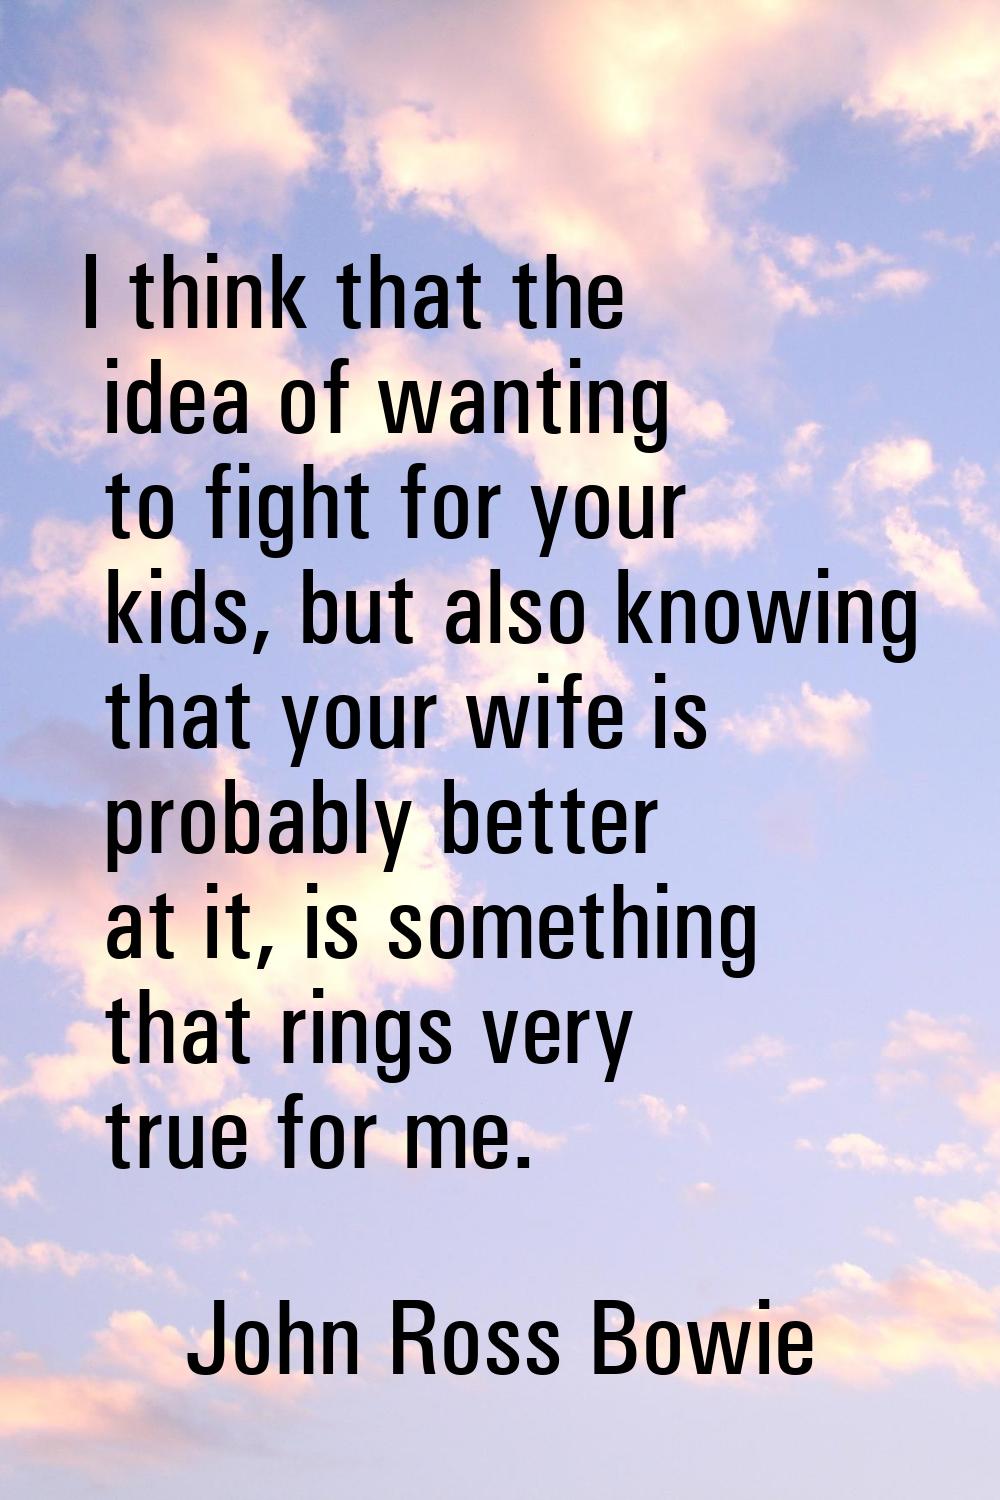 I think that the idea of wanting to fight for your kids, but also knowing that your wife is probabl